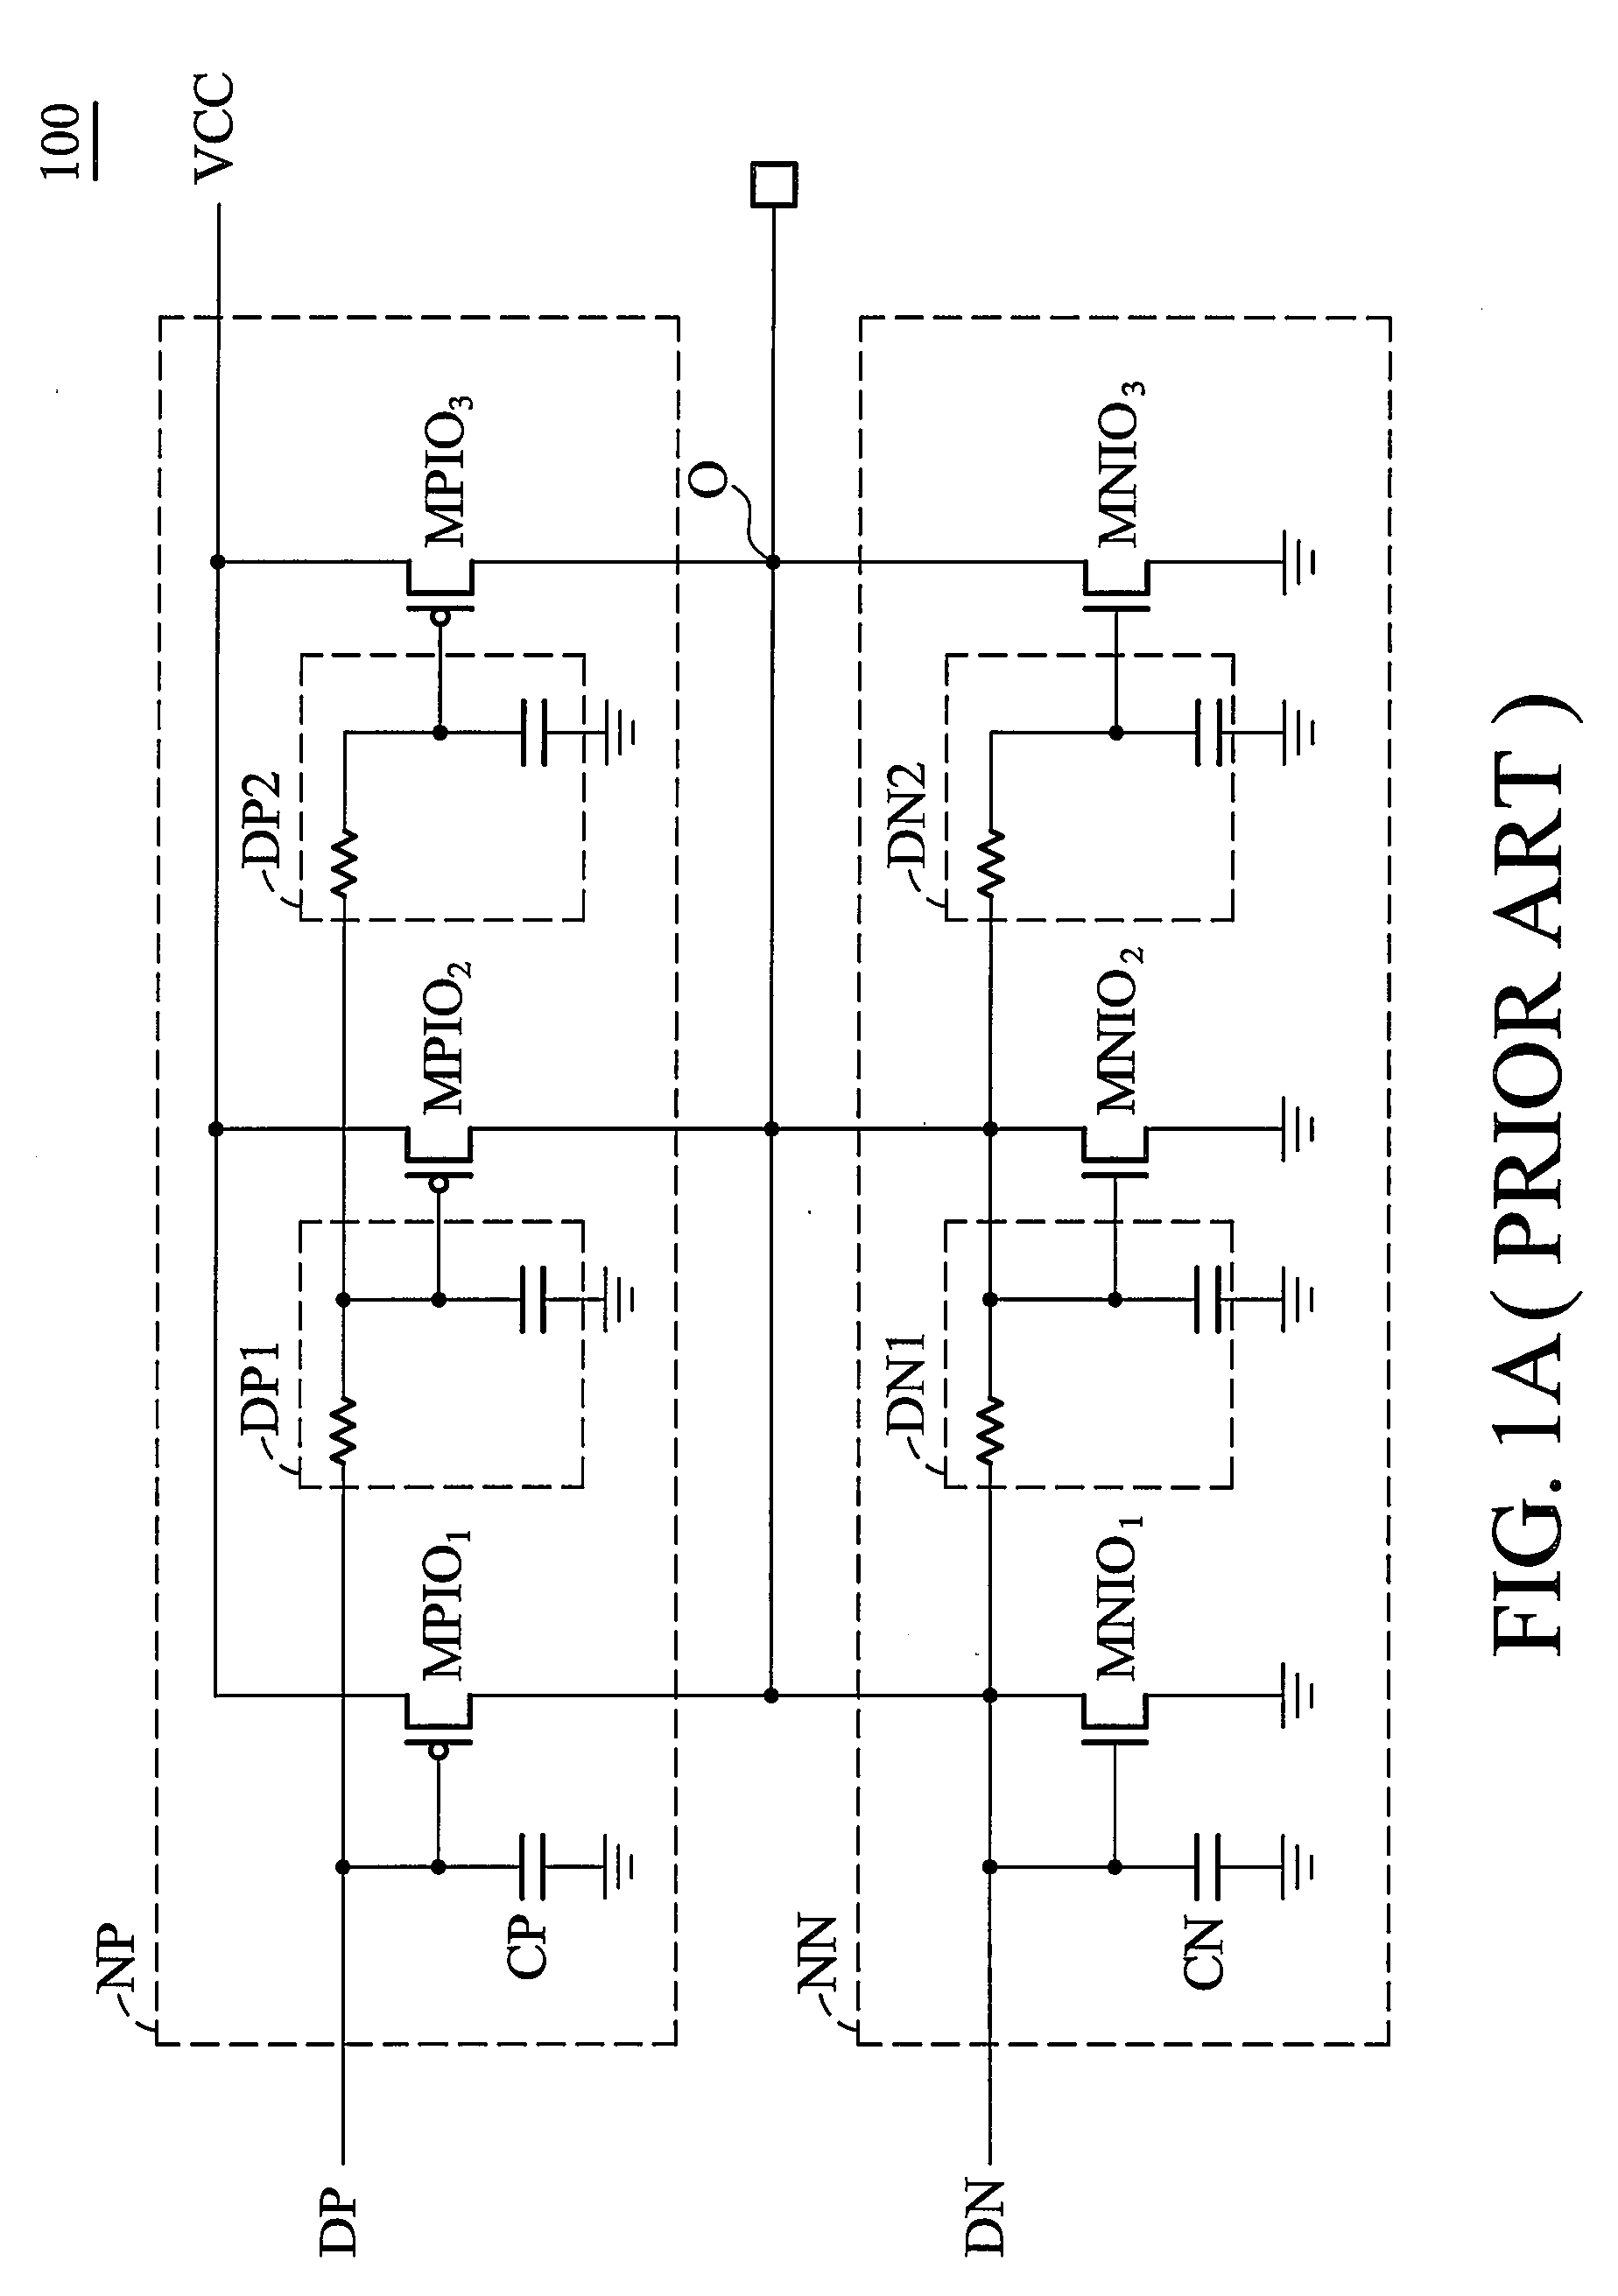 Slew rate controlled circuits